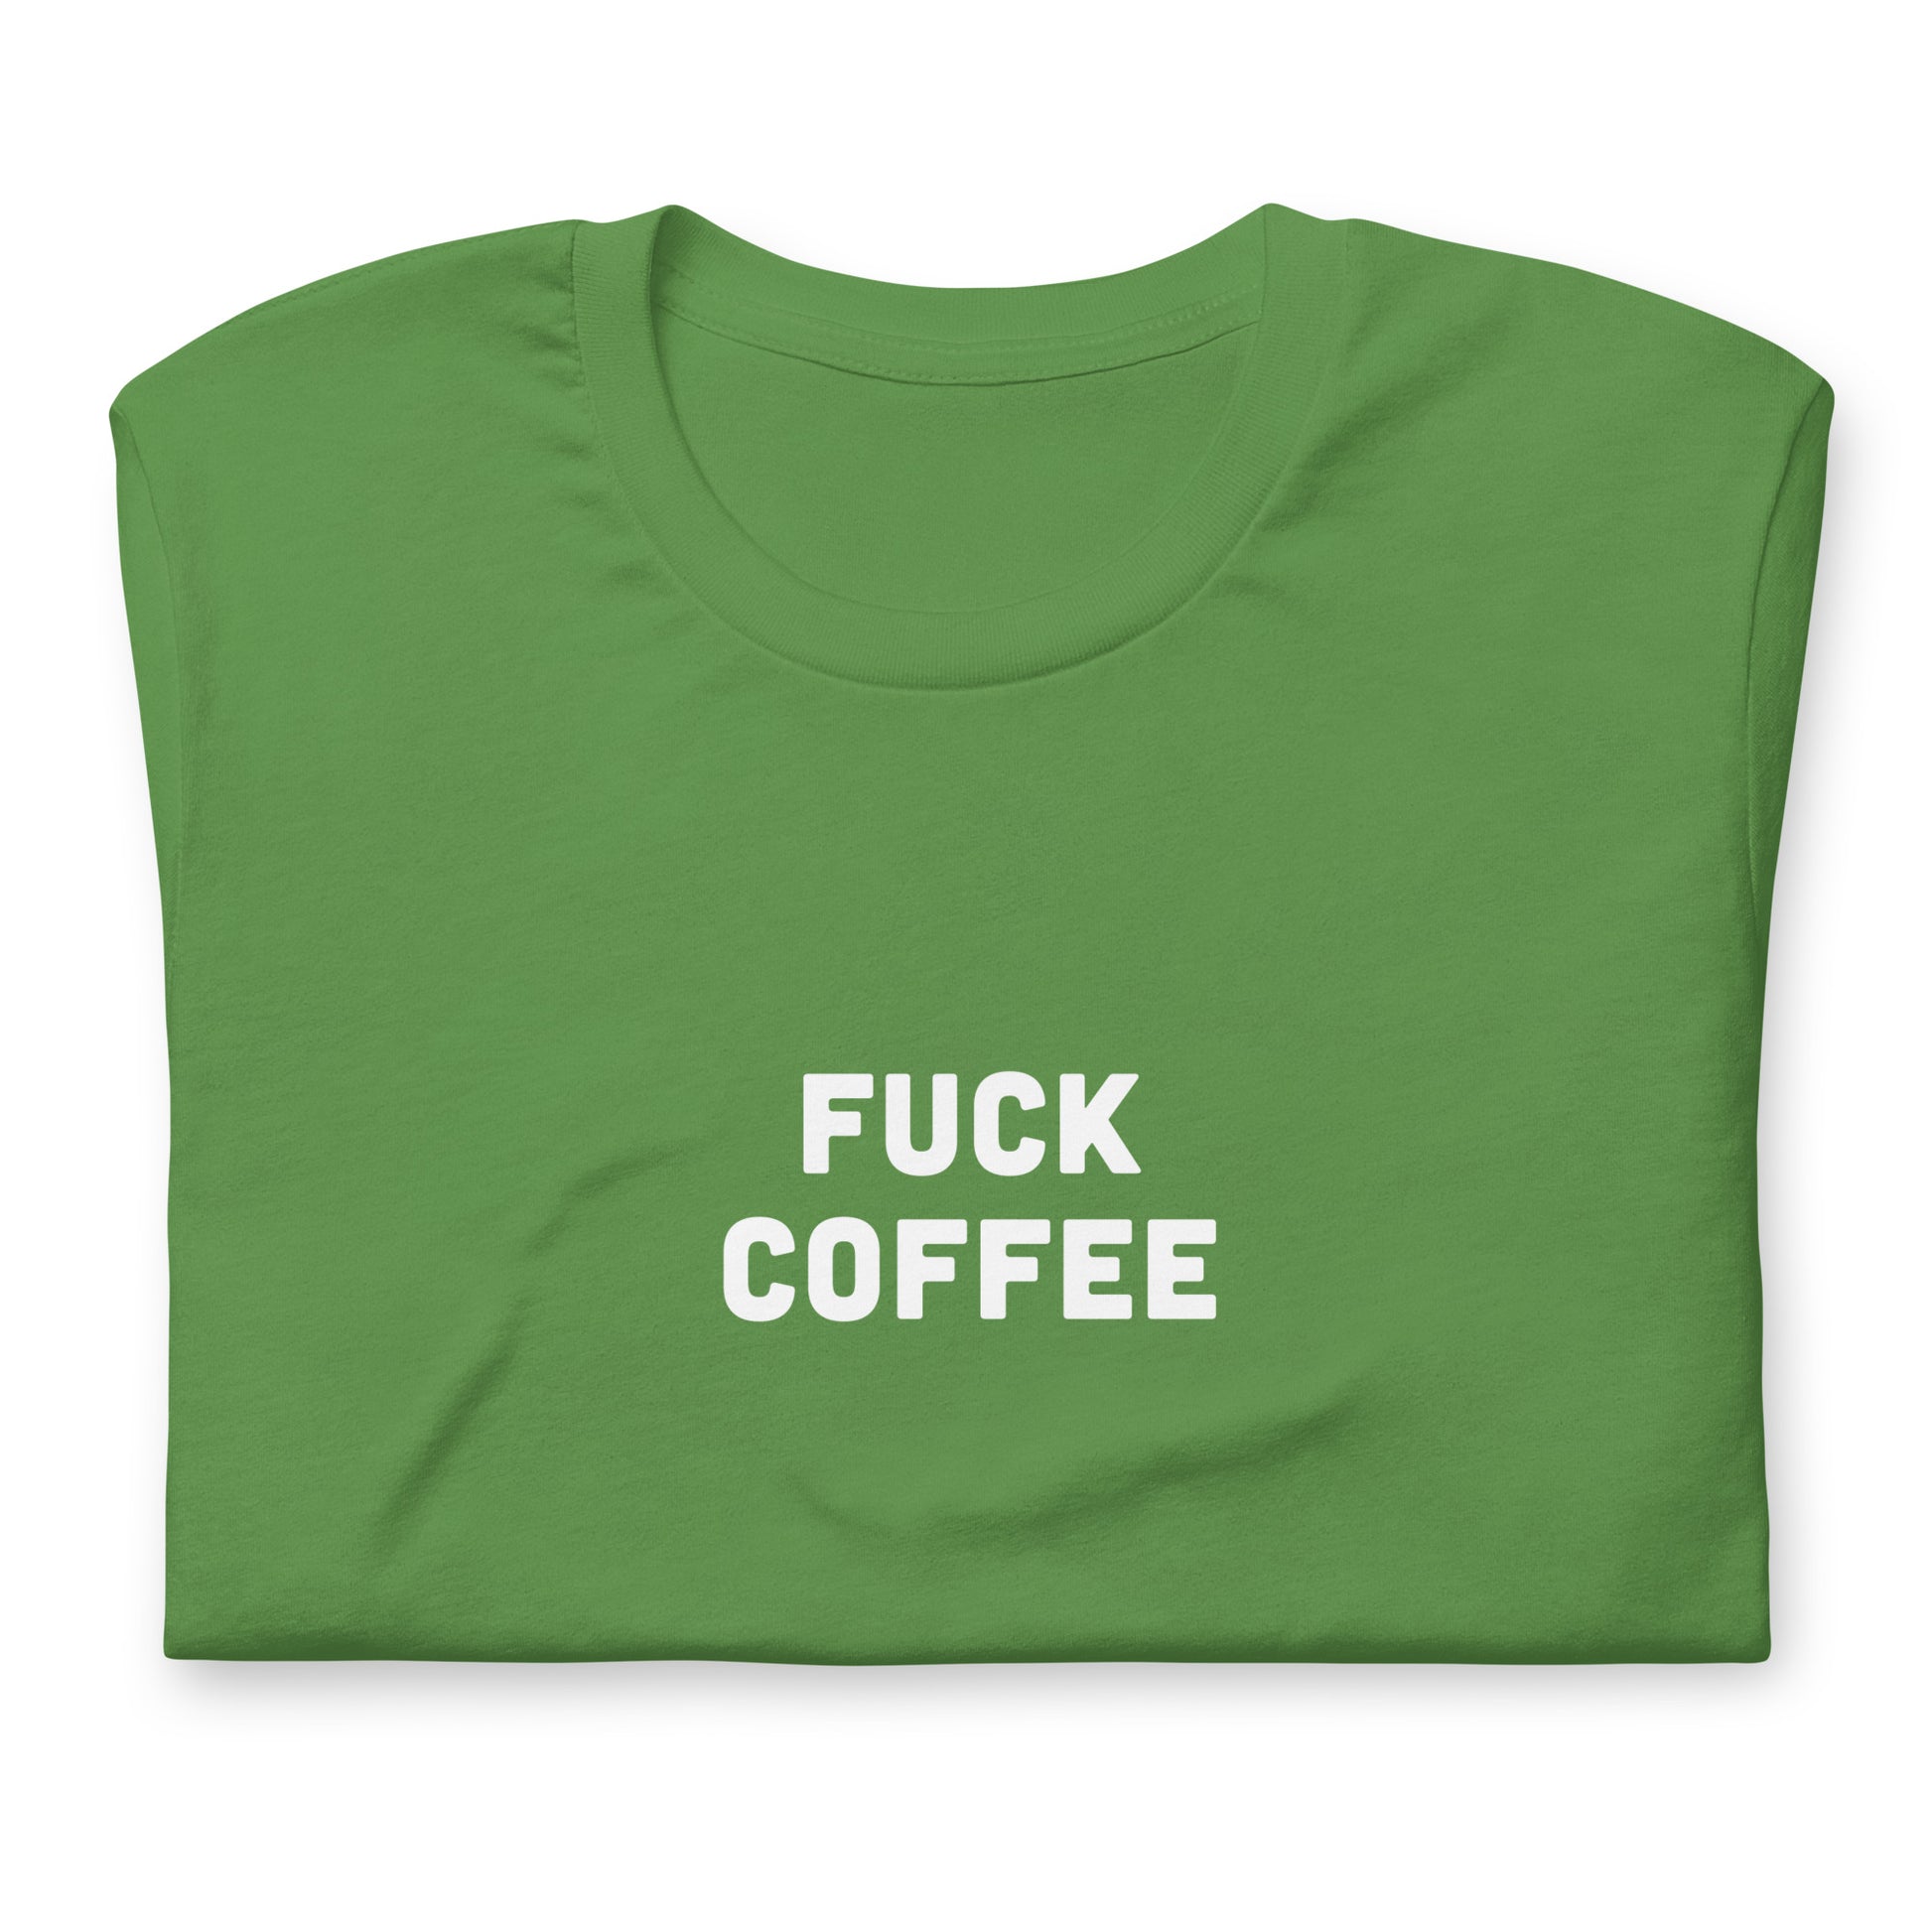 Fuck Coffee T-Shirt Size 2XL Color Navy